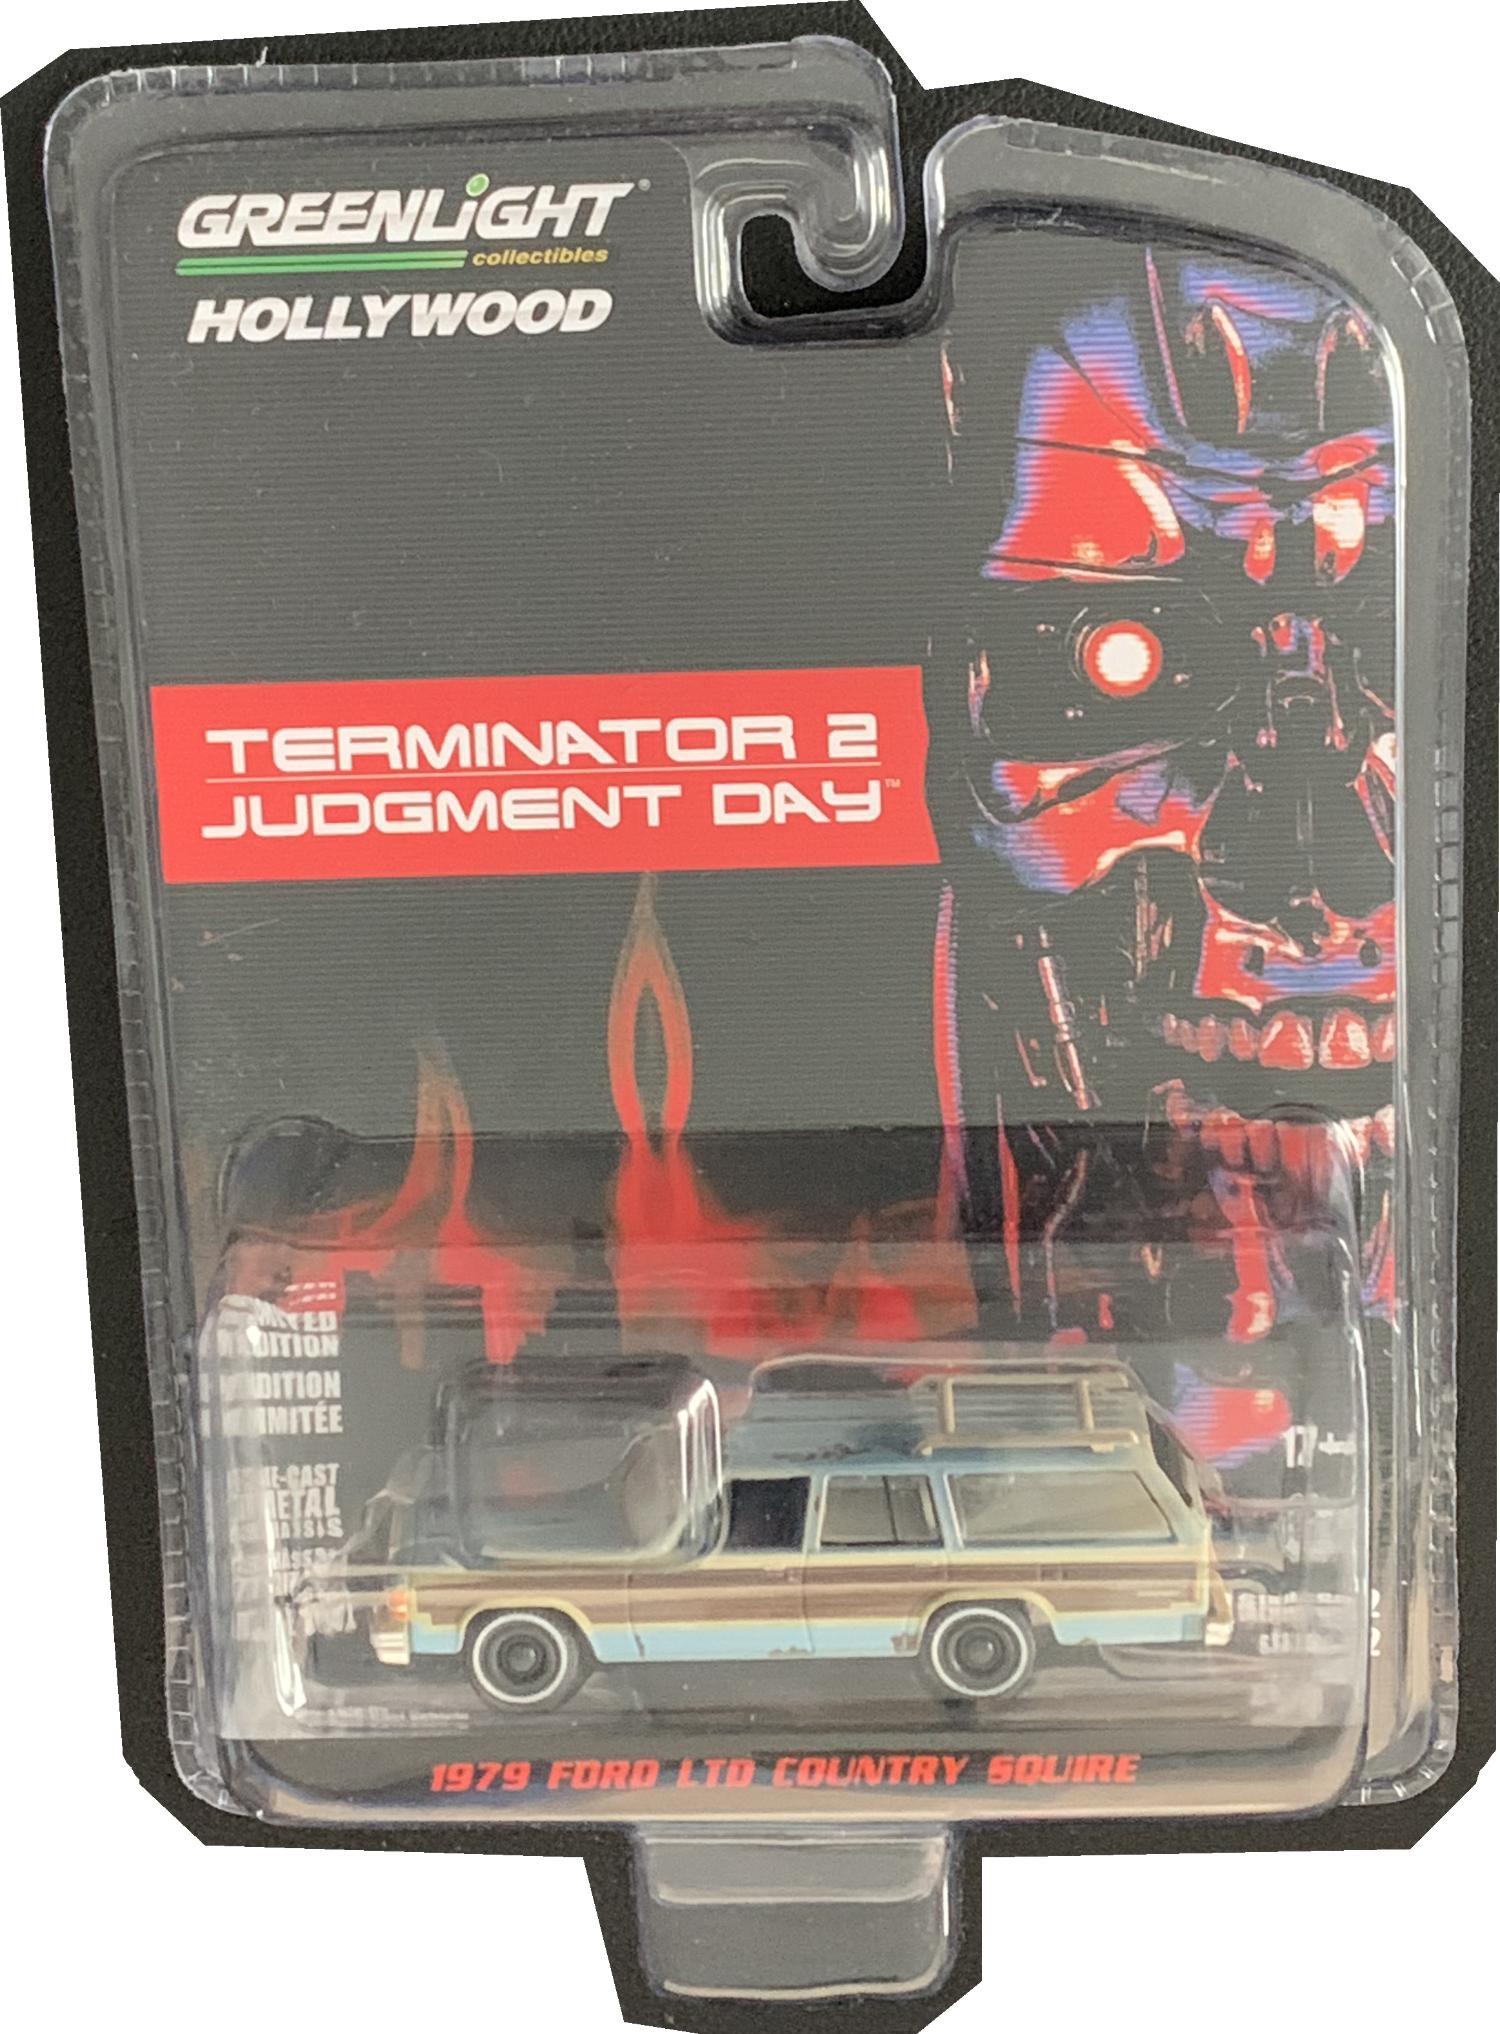 models from Terminator files